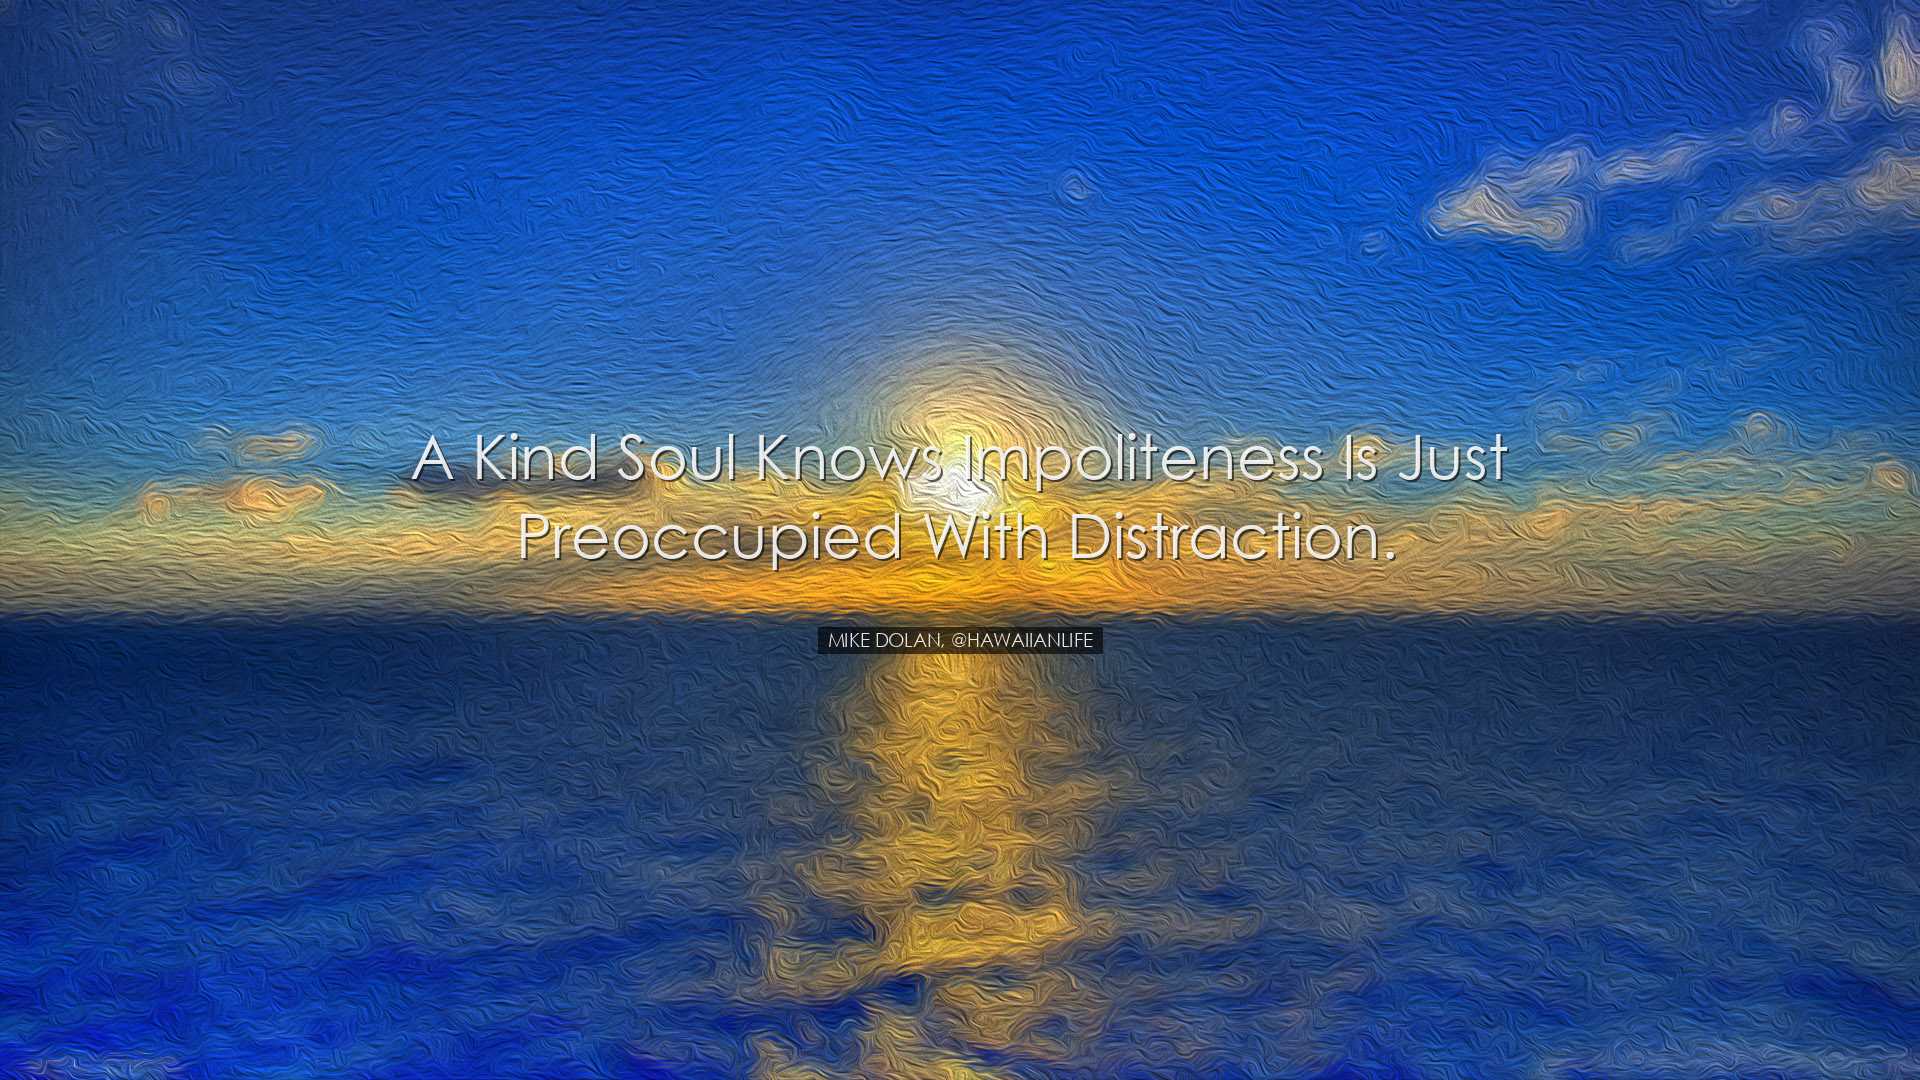 A kind soul knows impoliteness is just preoccupied with distractio